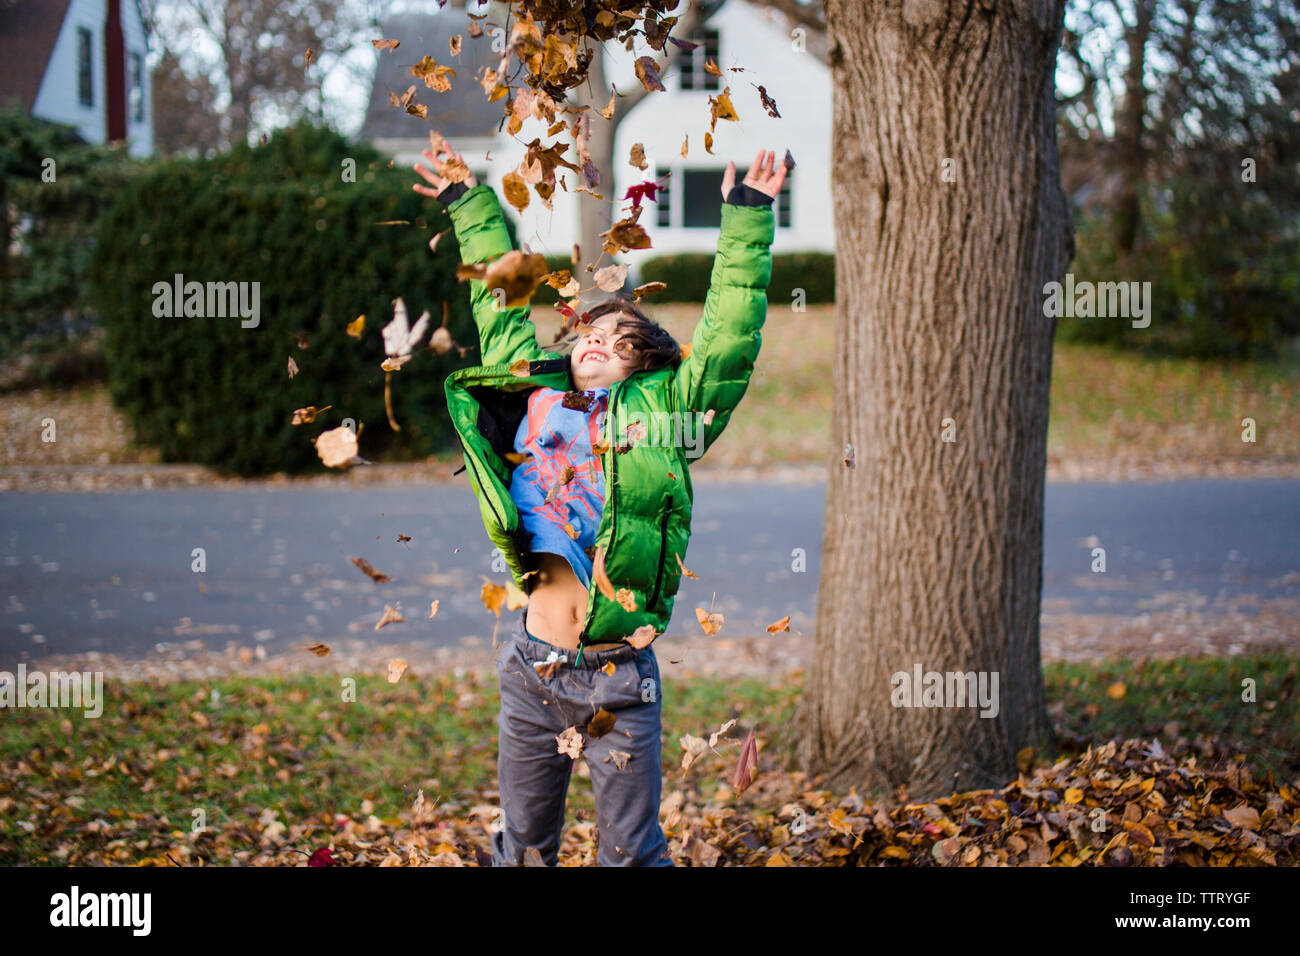 a happy, smiling boy with his arms up, throws leaves into the air Stock Photo